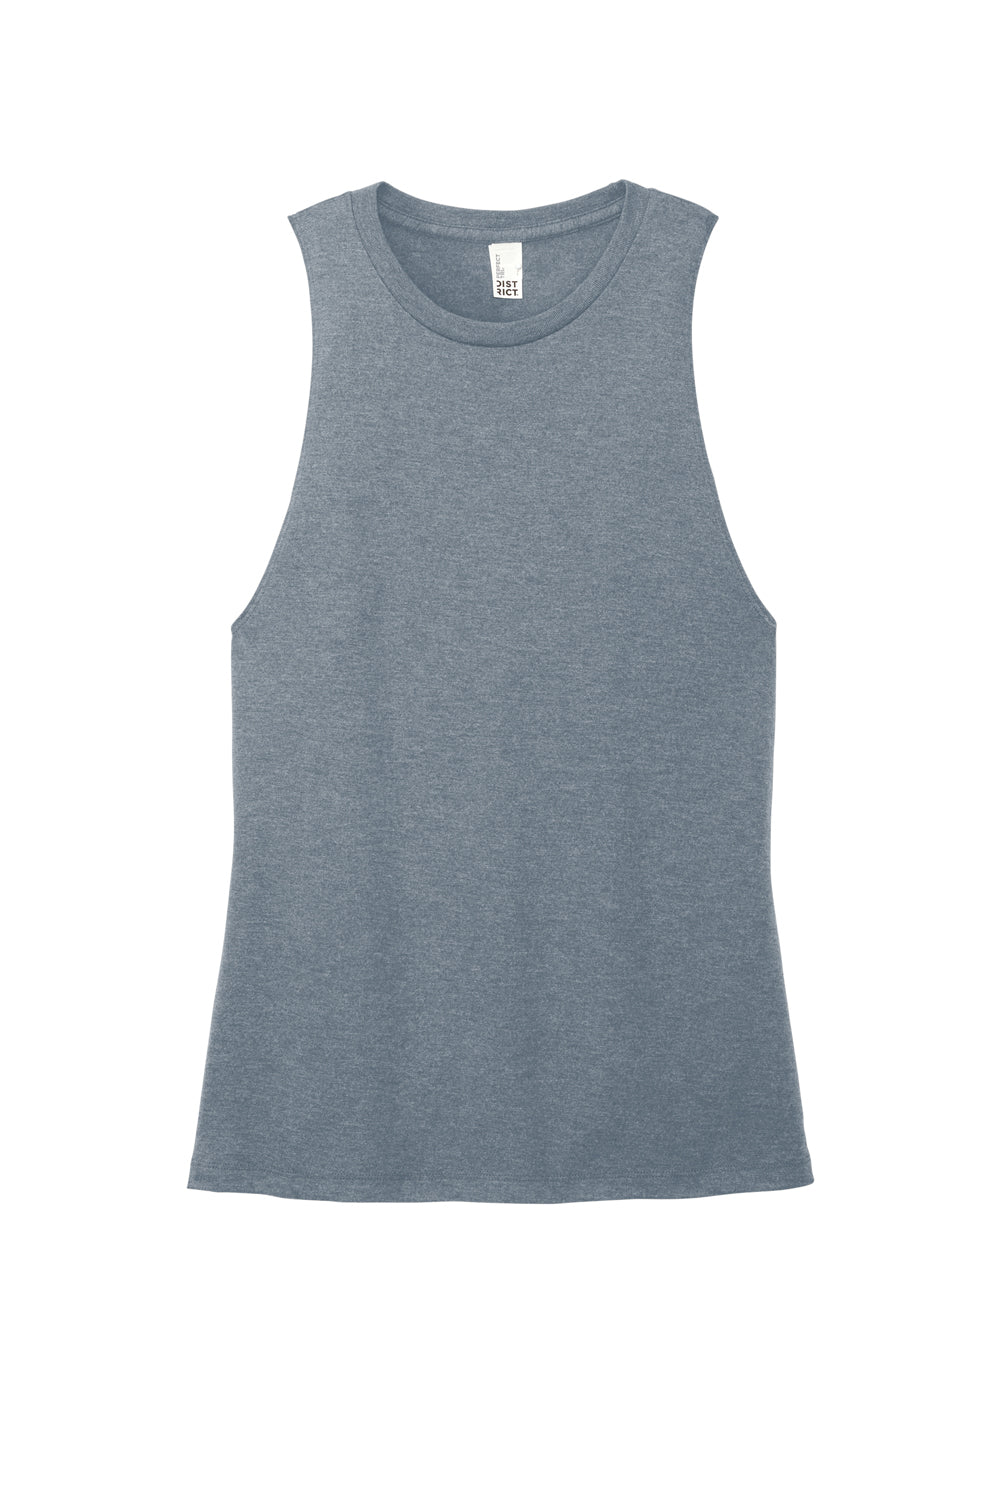 District DT153 Womens Perfect Tri Muscle Tank Top Heather Flint Blue Flat Front